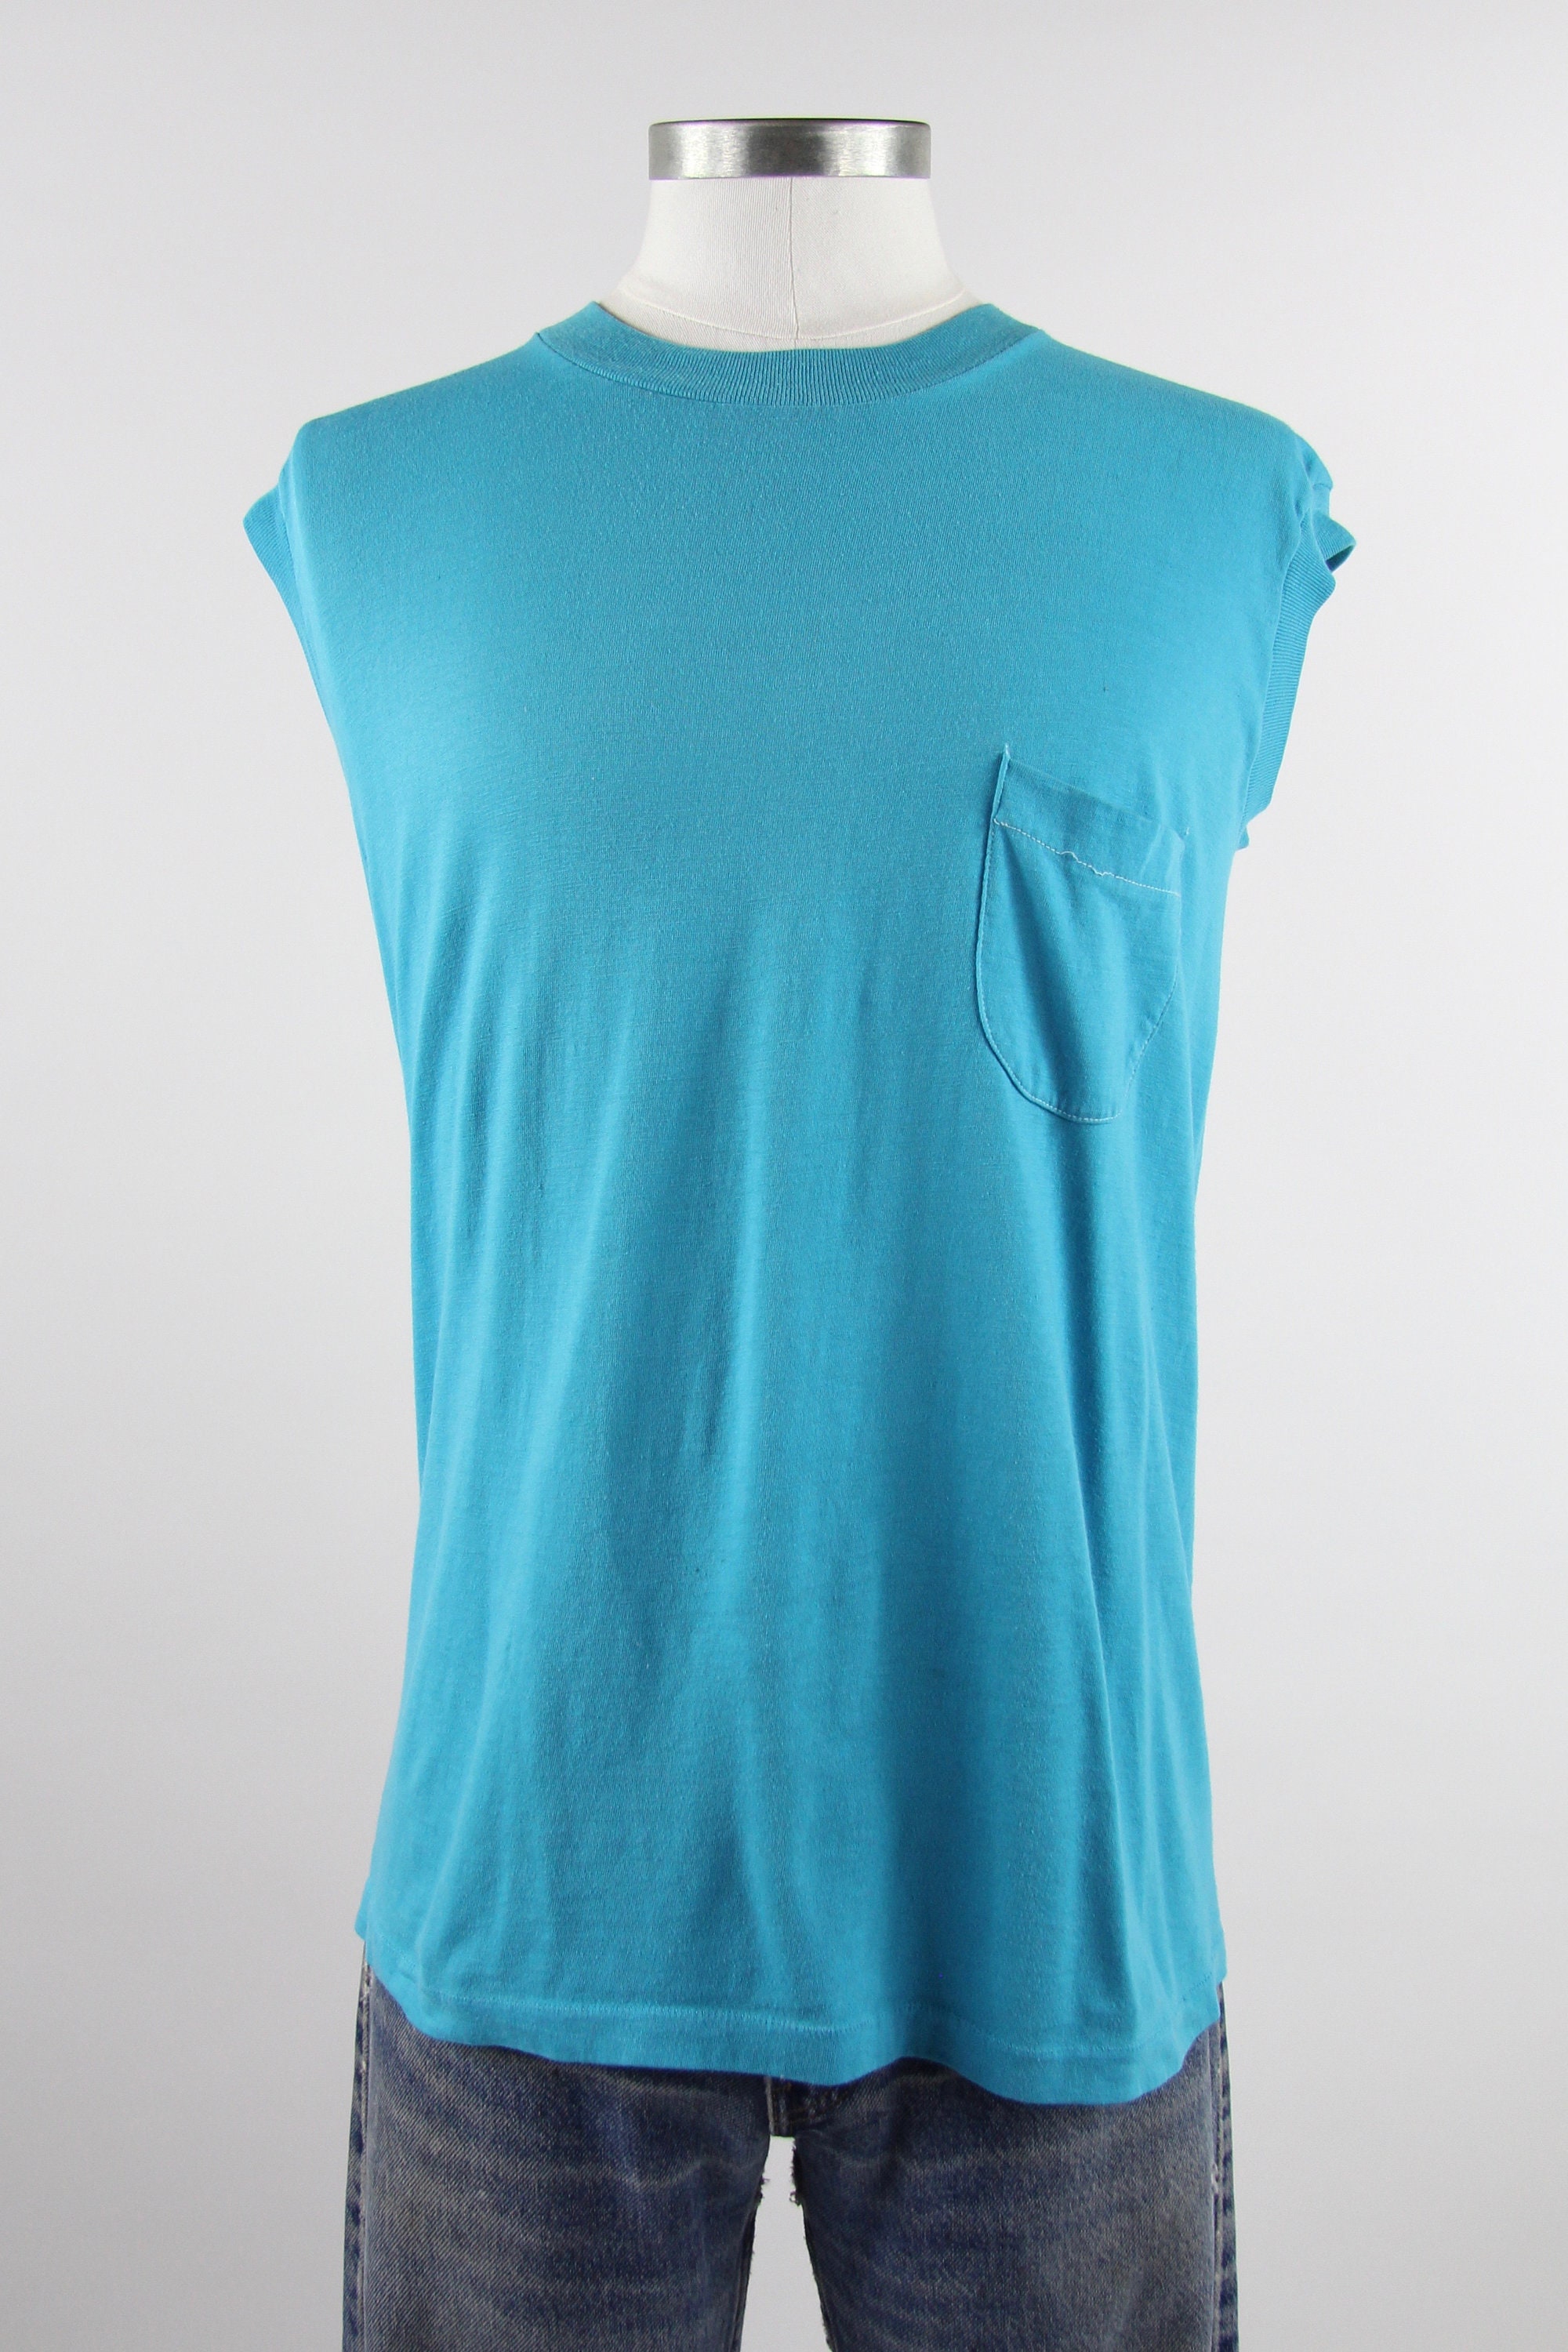 Blank Teal Sleeveless Pocket Tee Paper Thin Blue T-Shirt Vintage Size ...